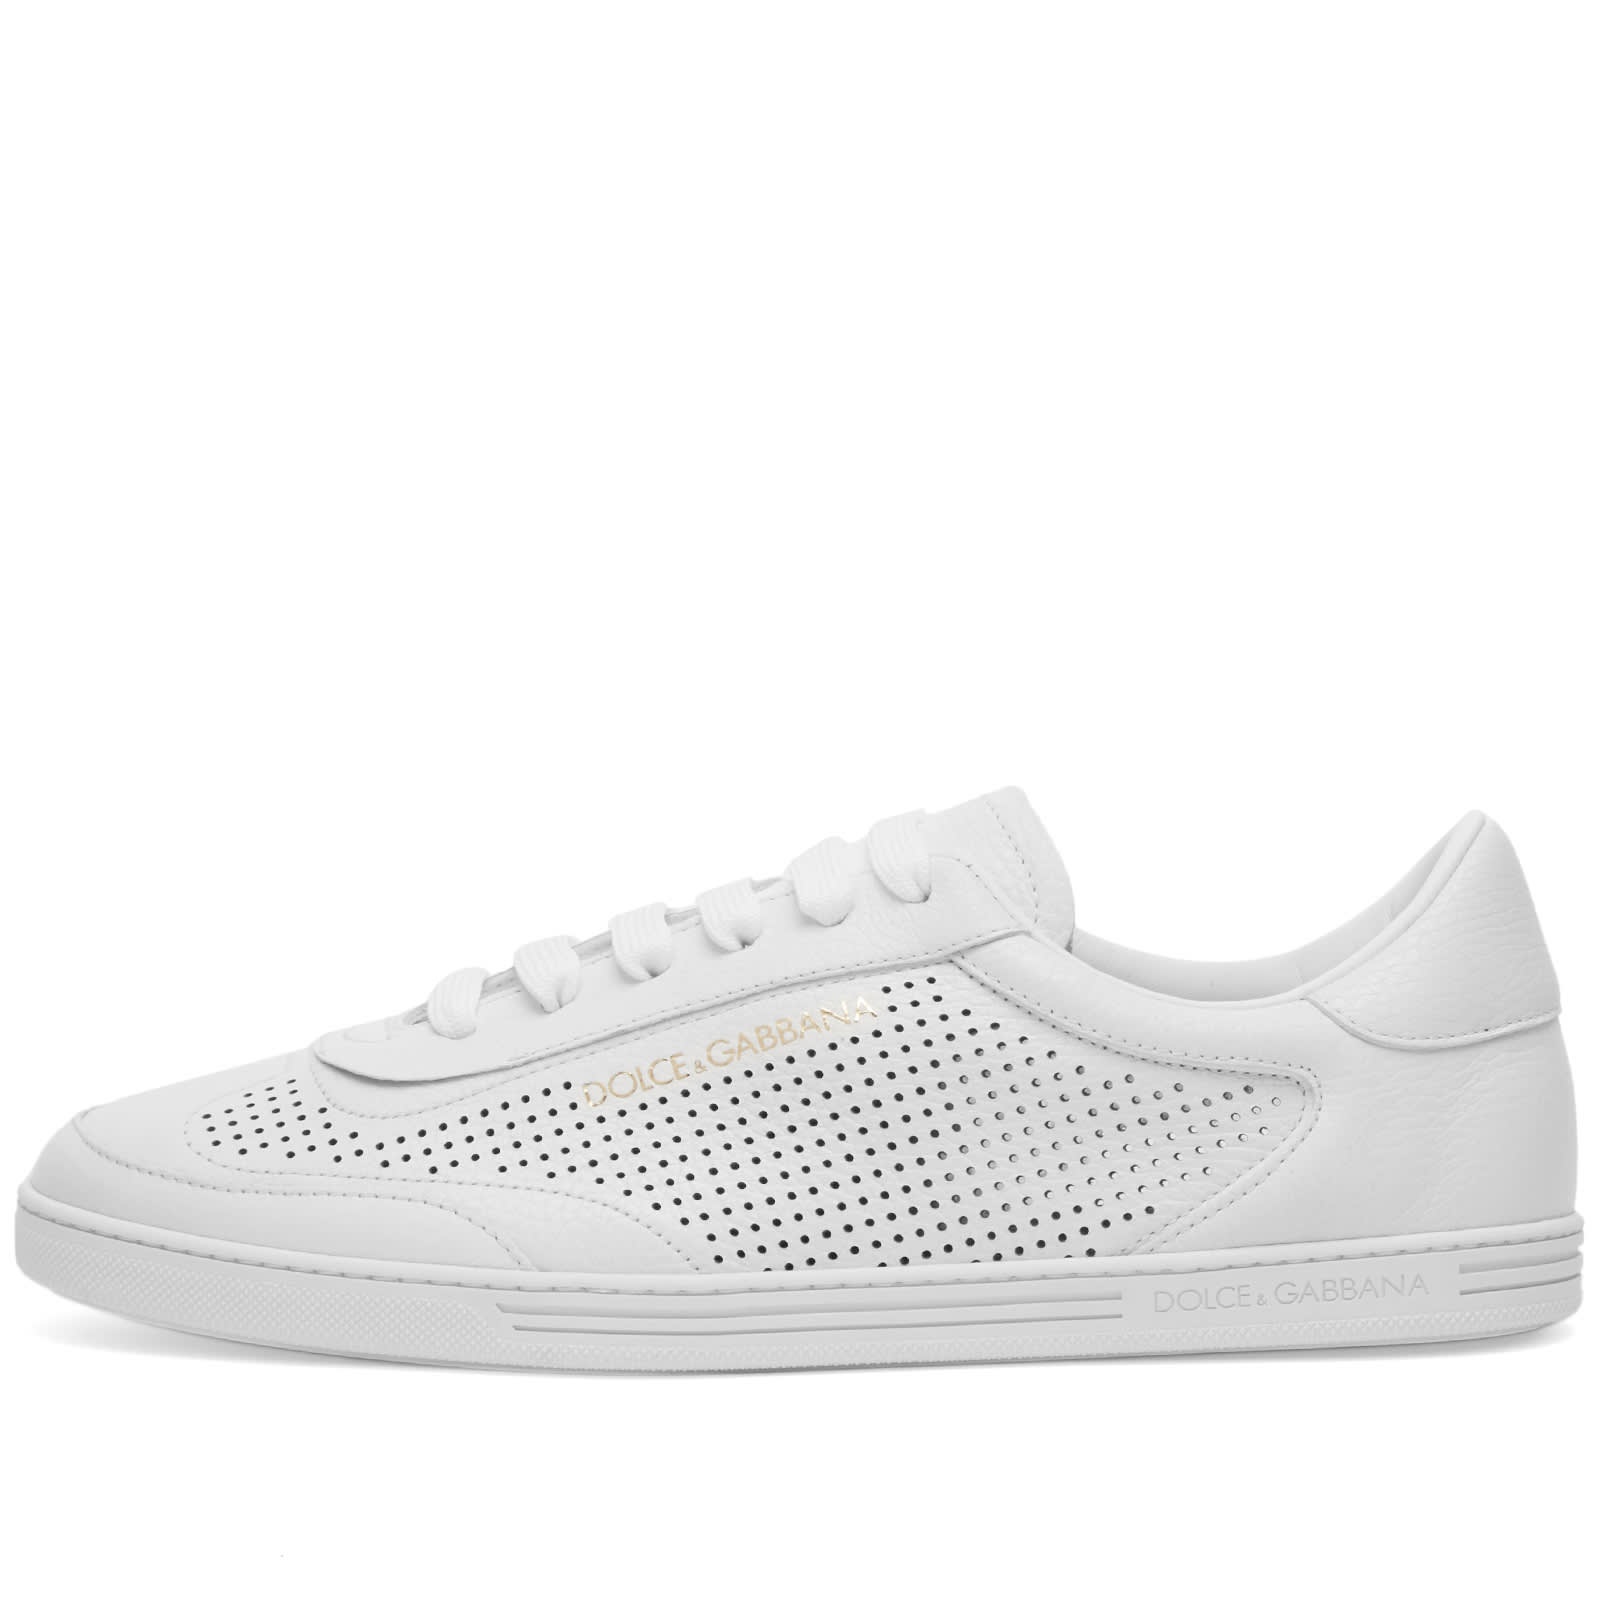 Dolce & Gabbana Saint Tropez Perforated Leather Sneaker - 2